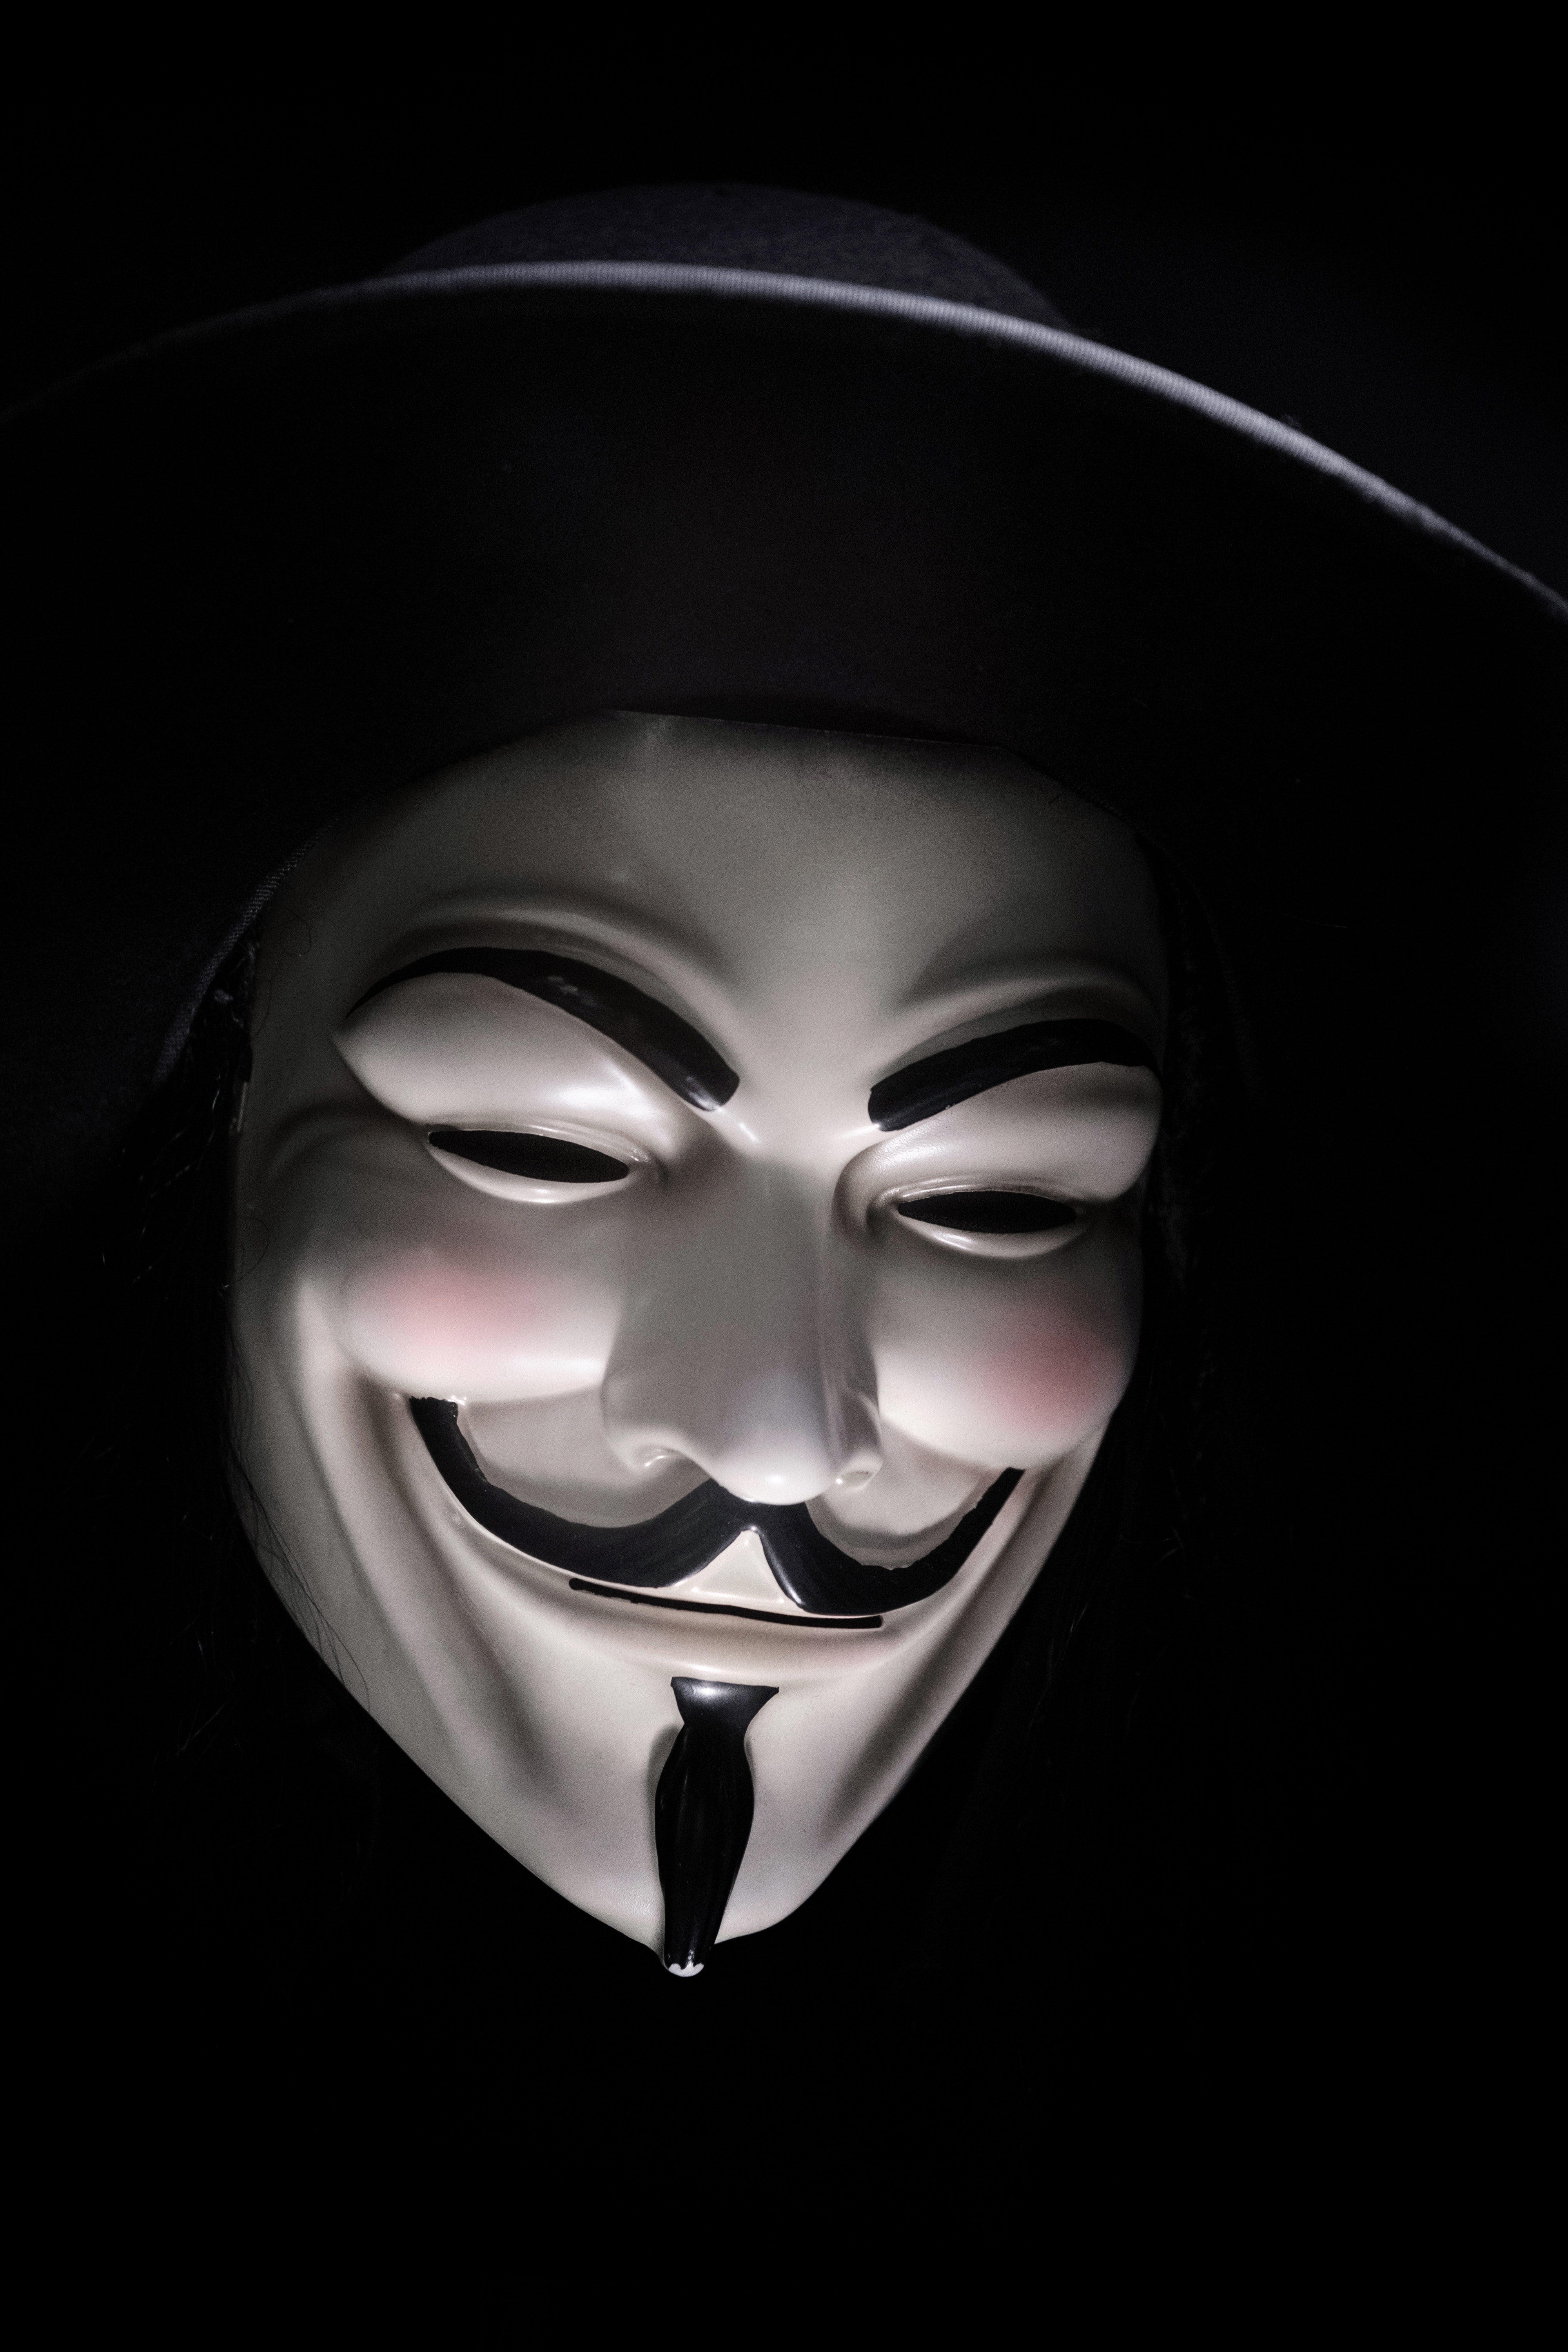 dark, anonymous, mask, miscellanea, miscellaneous, hat cell phone wallpapers